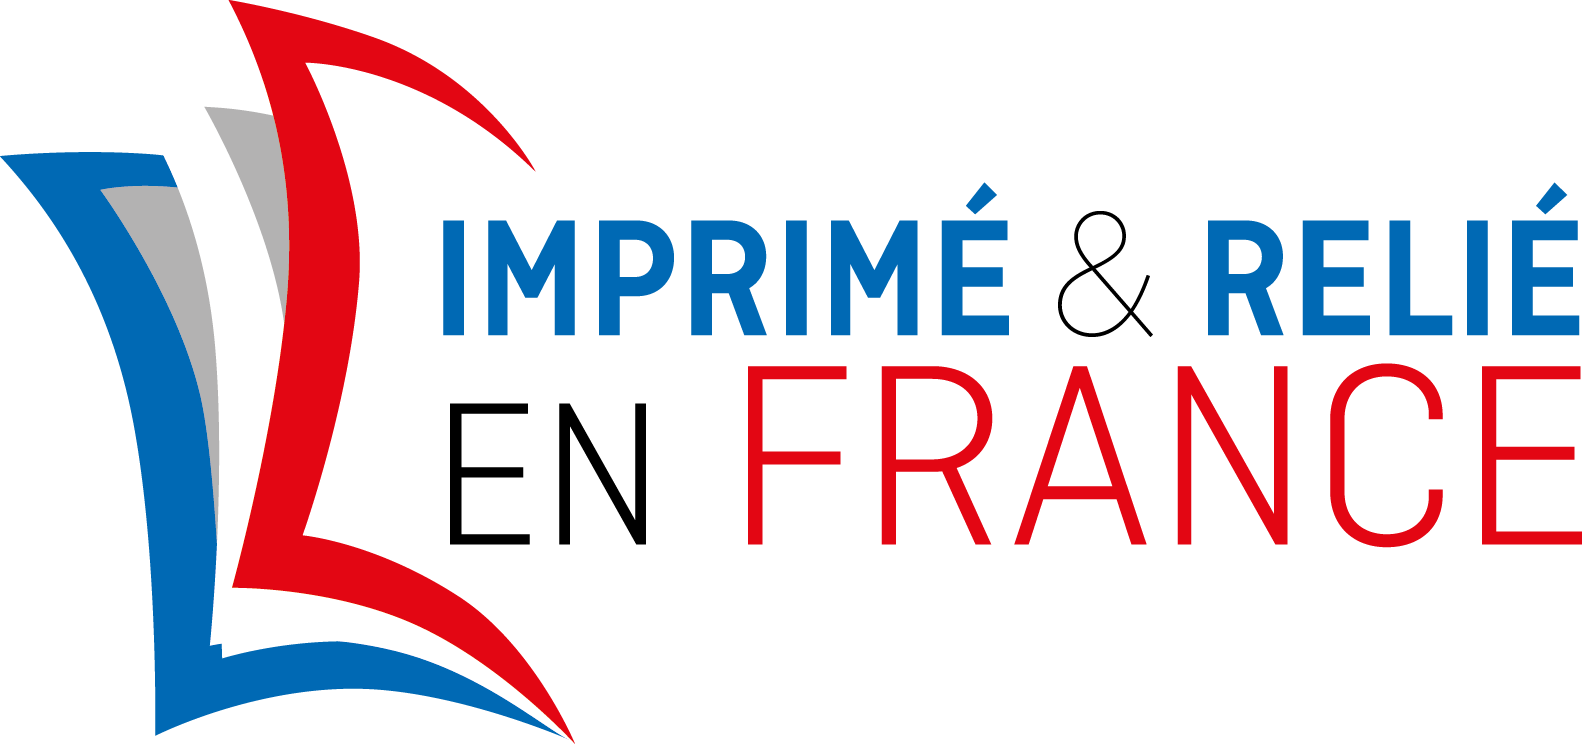 Made in France 